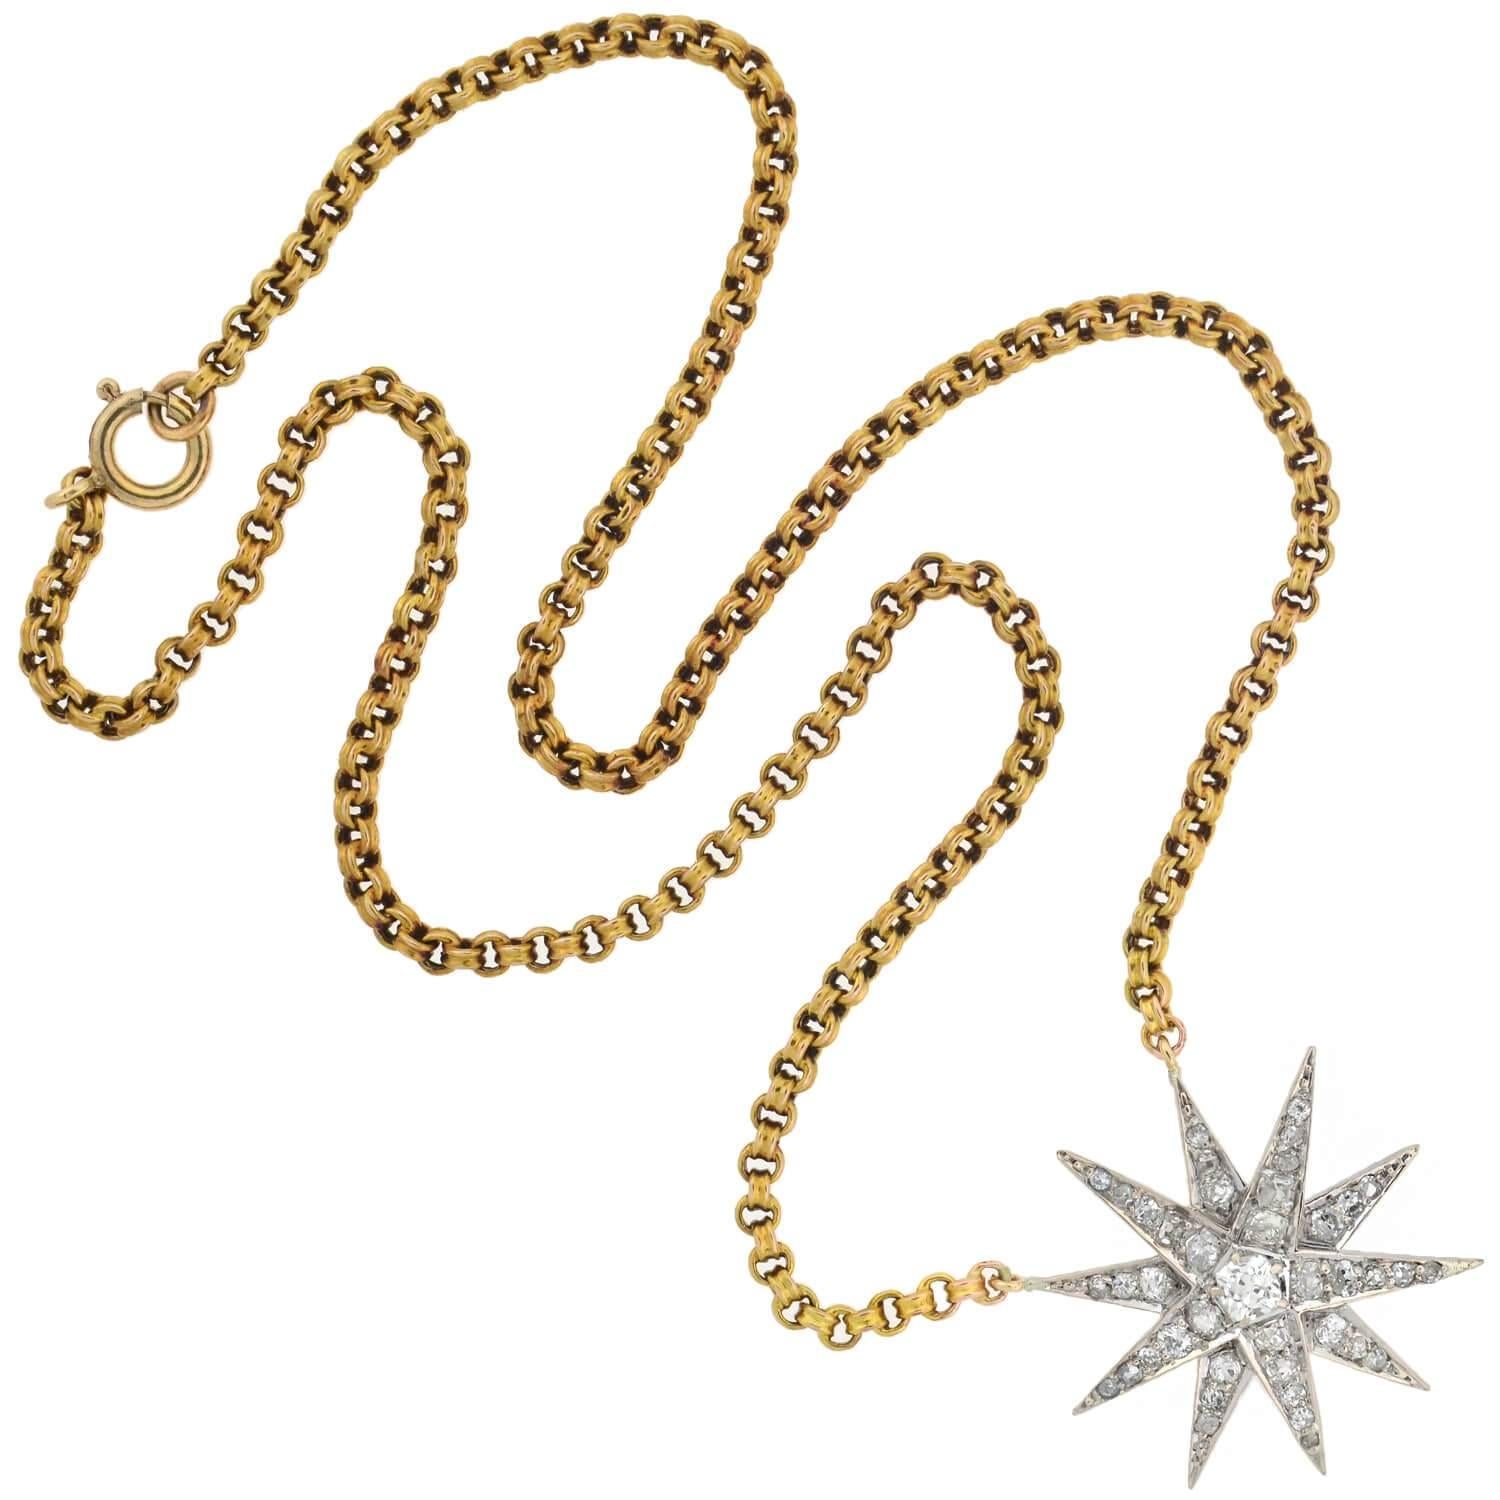 A breathtaking diamond starburst pendant necklace from the Edwardian (ca1910) era! This gorgeous piece is crafted in 14kt white and yellow gold and comprised of a dazzling starburst which hangs at the center of a lovely Victorian-era chain. The 10